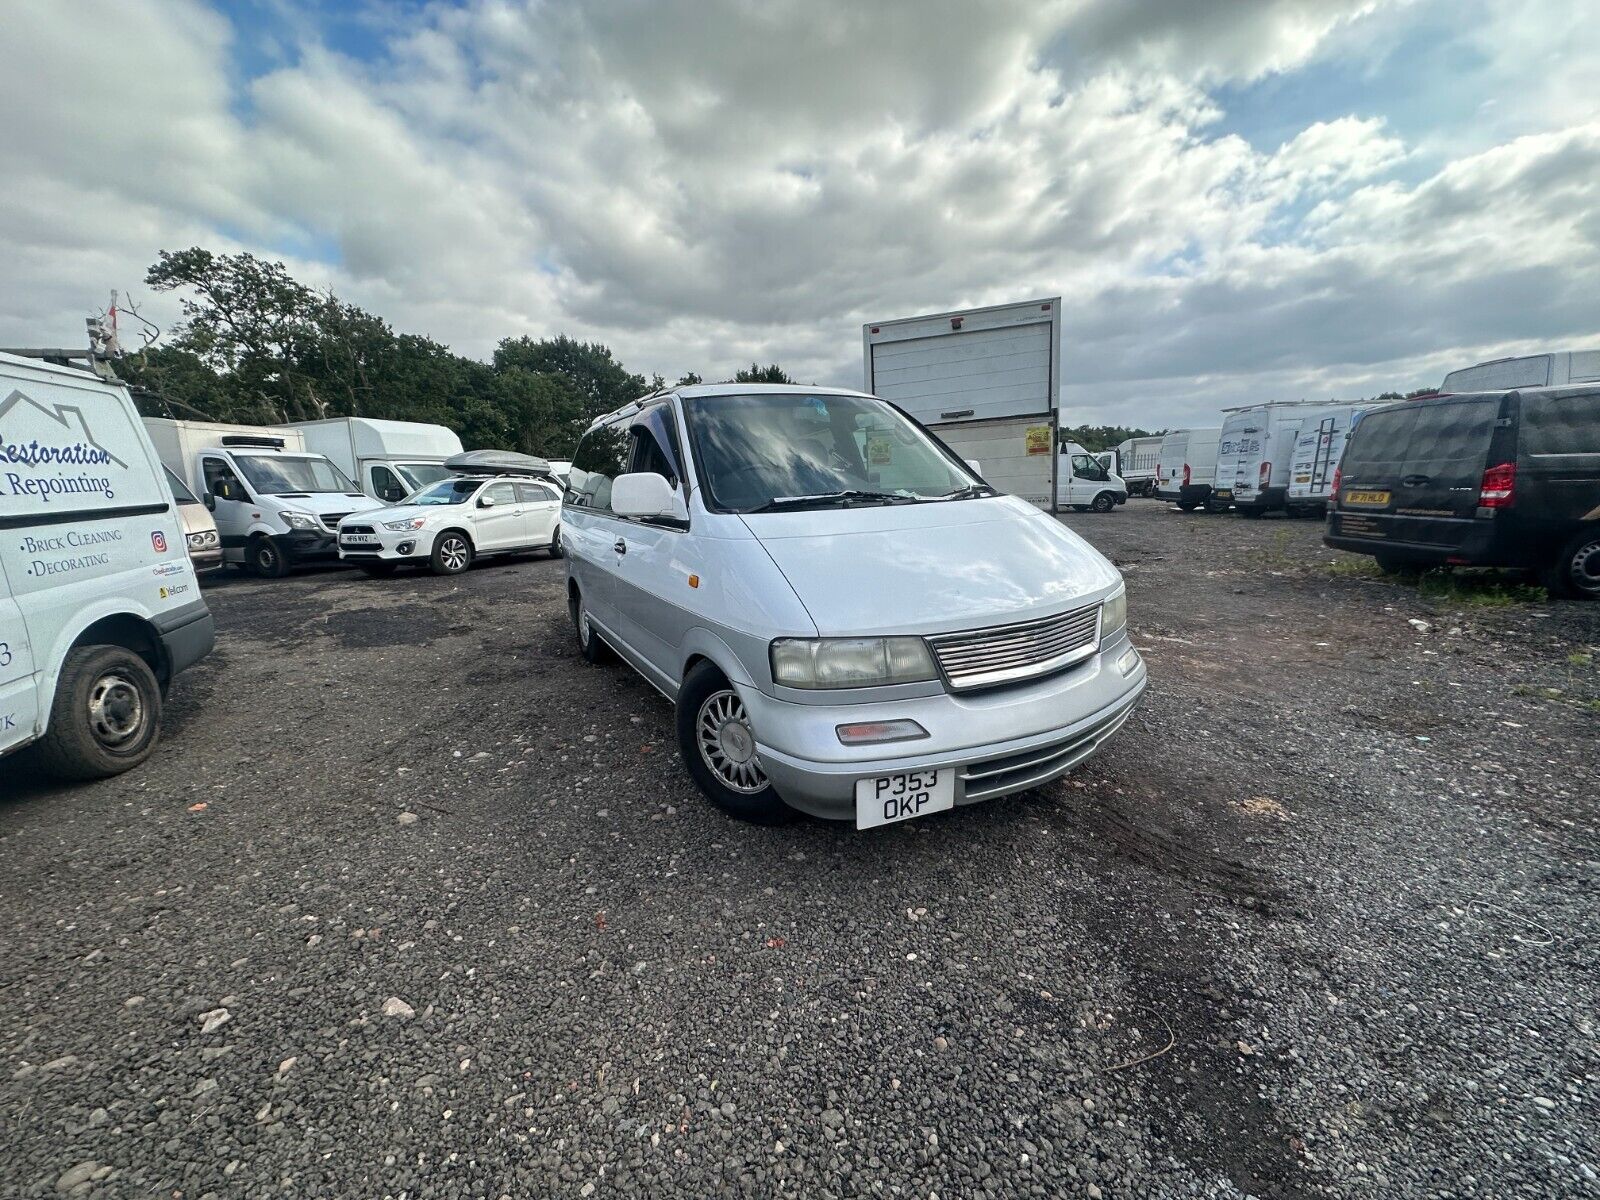 Bid on RELIABLE DRIVE, MINIBUS POTENTIAL: '53 PLATE NISSAN - ONLY 76K MILES - NO VAT ON HAMMER- Buy &amp; Sell on Auction with EAMA Group